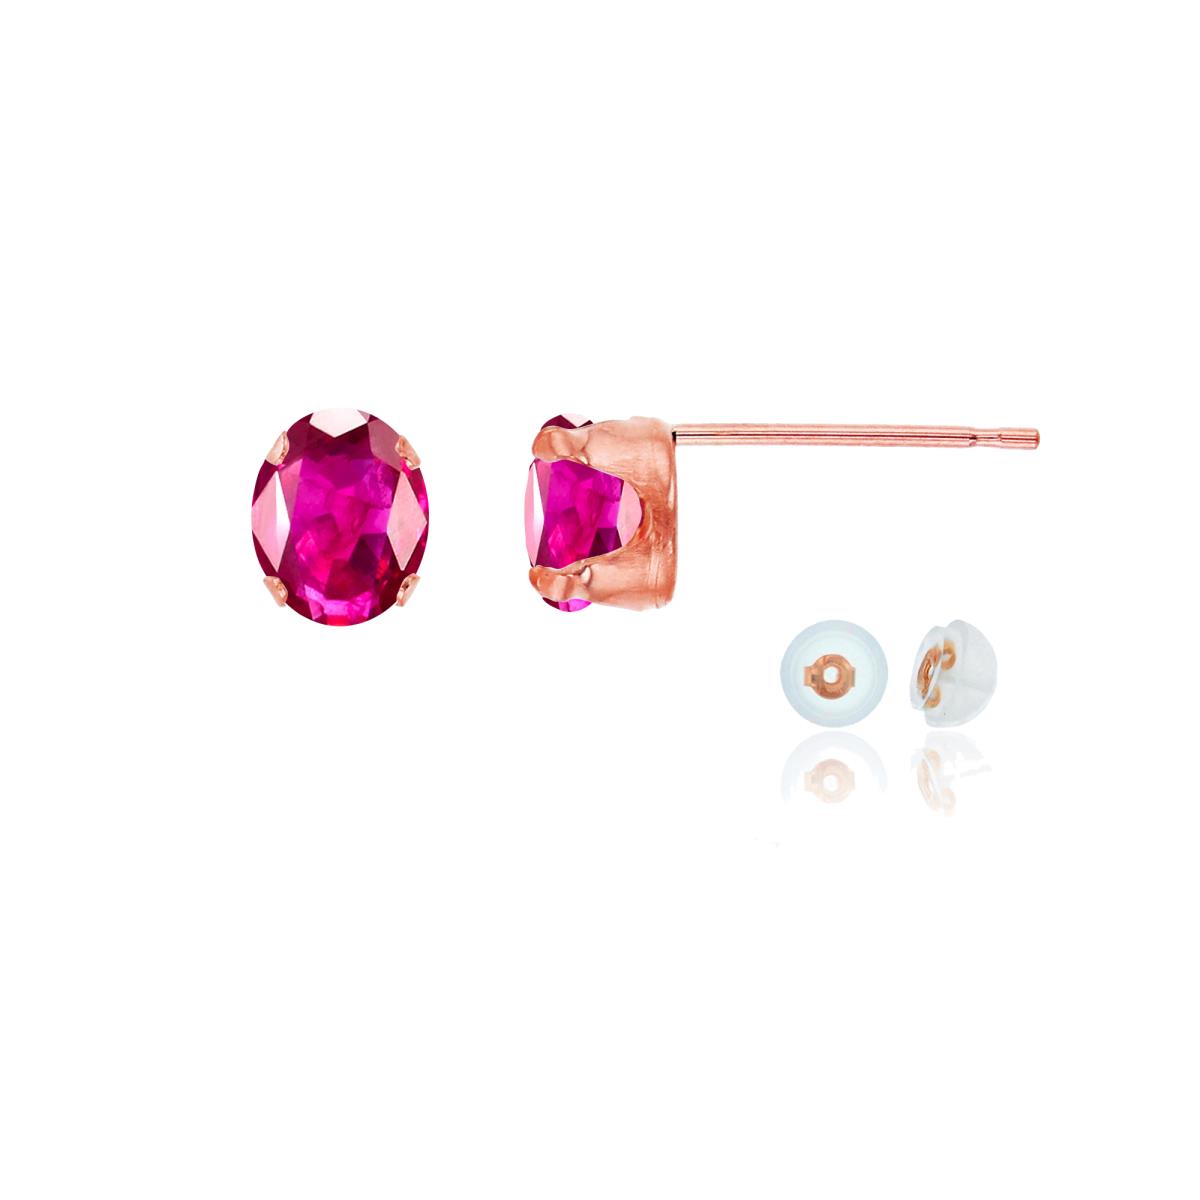 10K Rose Gold 6x4mm Oval Cr Ruby Stud Earring with Silicone Back